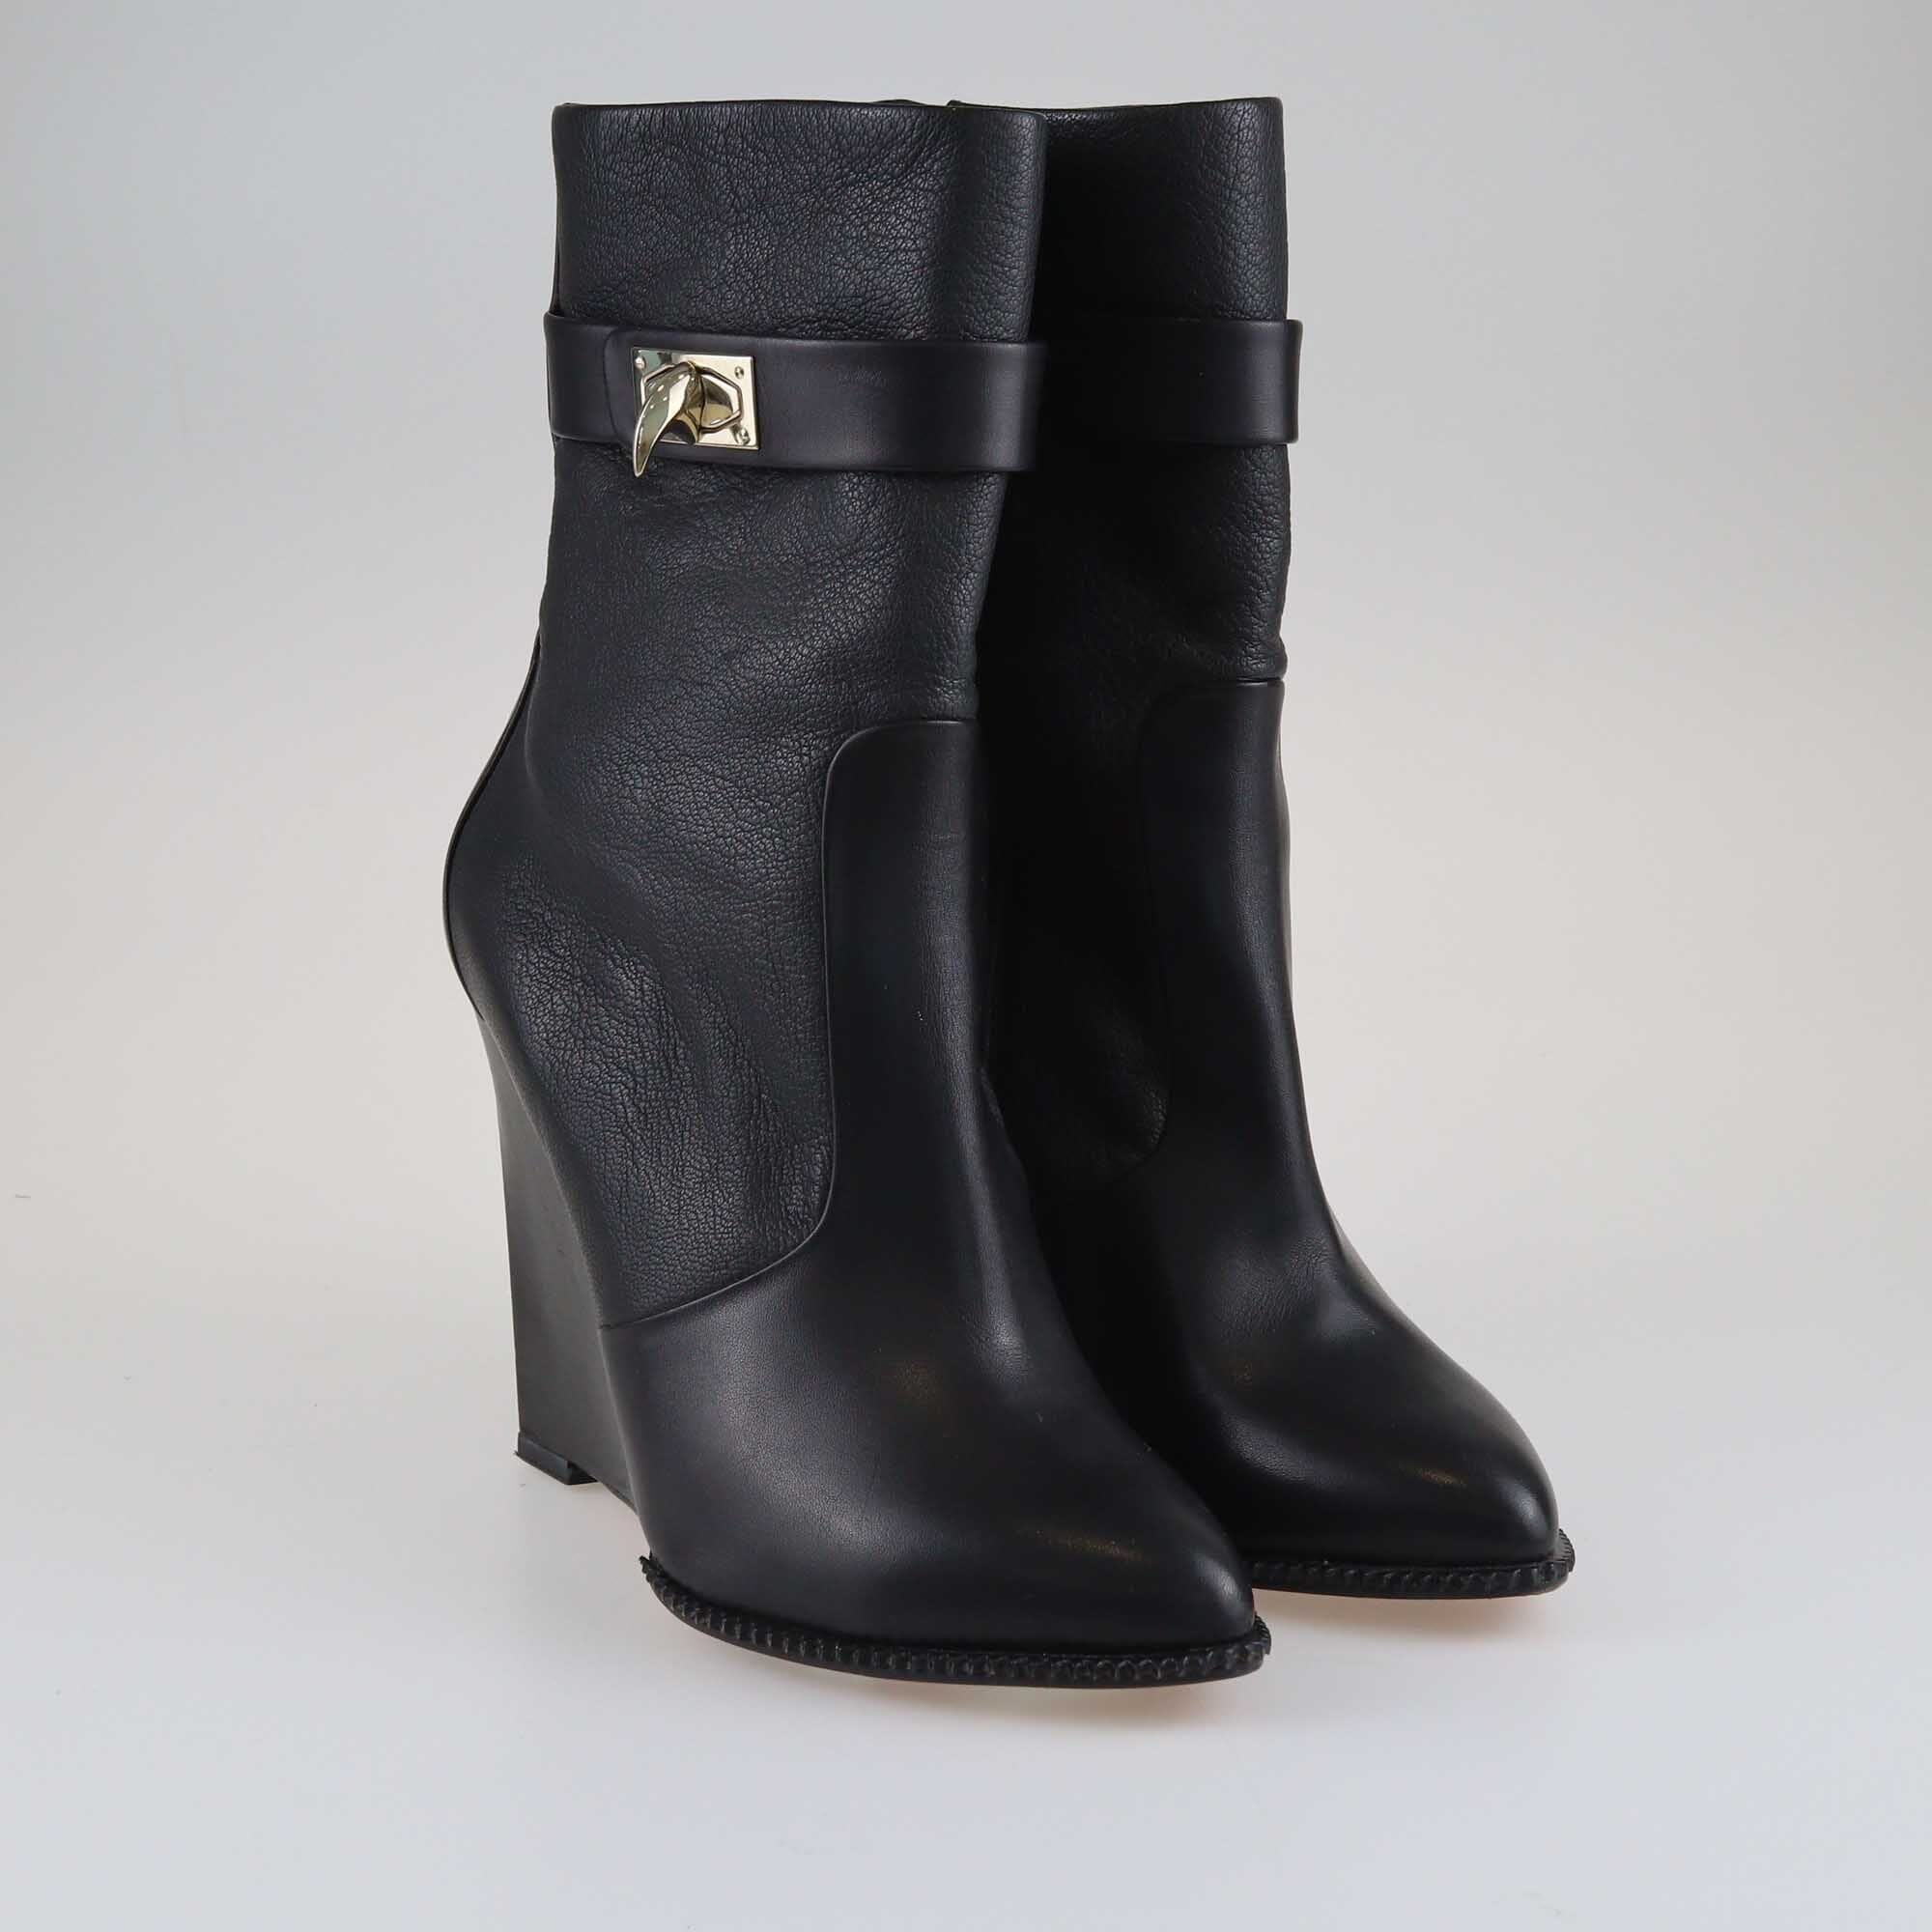 Givenchy Black Leather Shark Tooth Wedge Boots Shoes Givenchy 